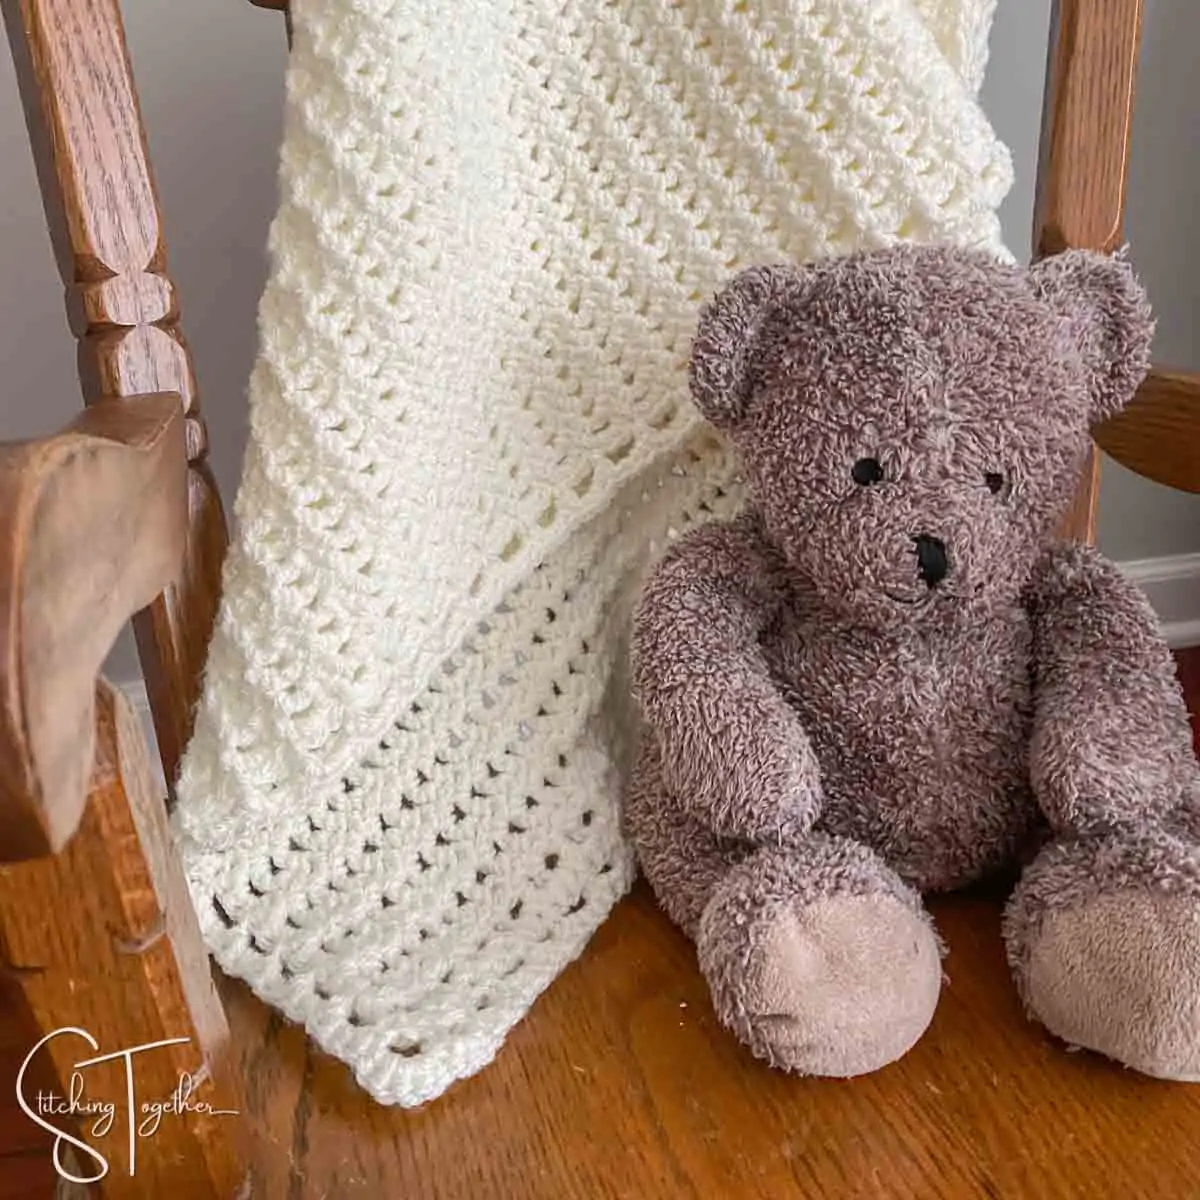 lacy crochet baby blanket draped on chair with stuffed bear next to it